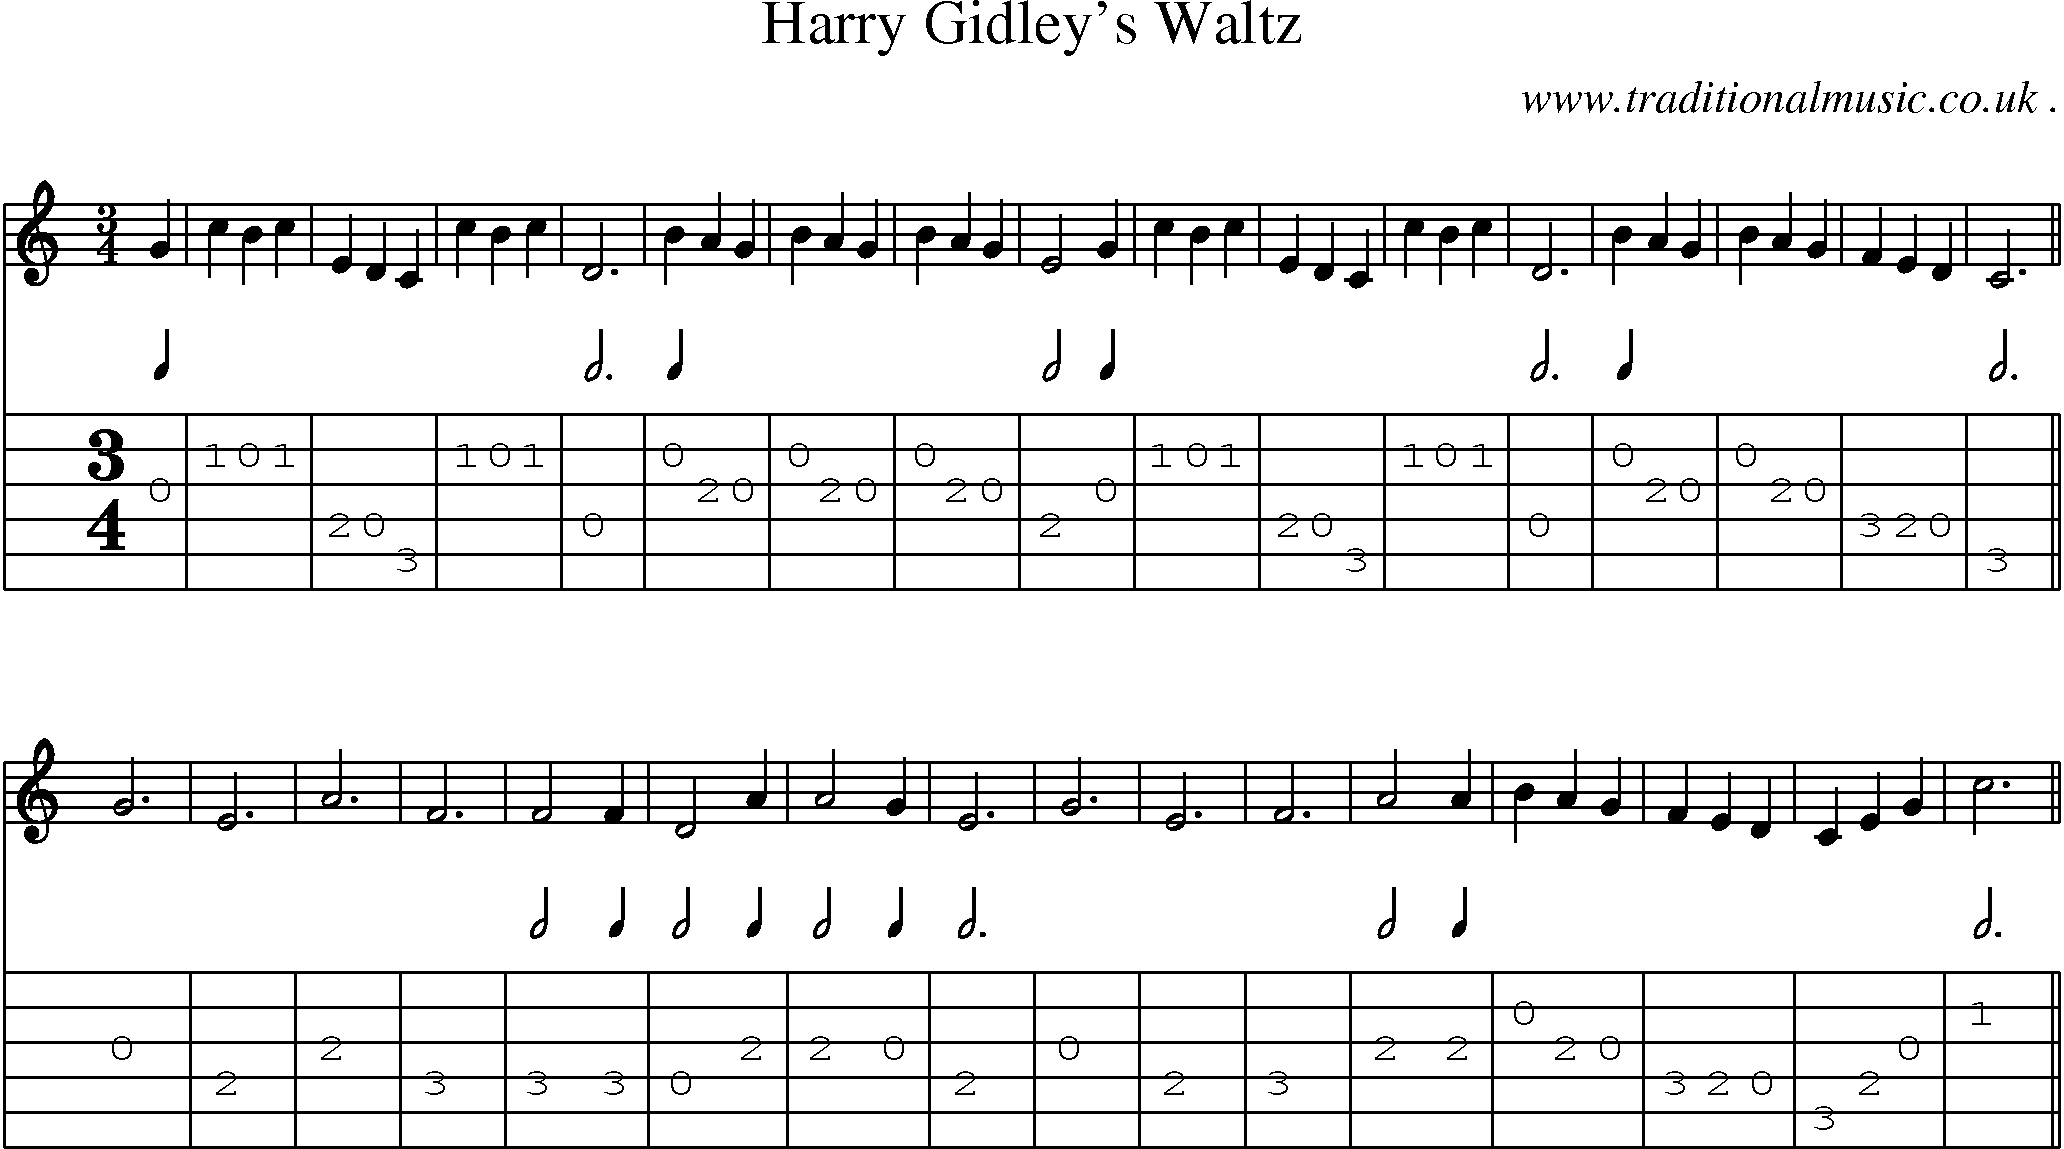 Sheet-music  score, Chords and Guitar Tabs for Harry Gidleys Waltz